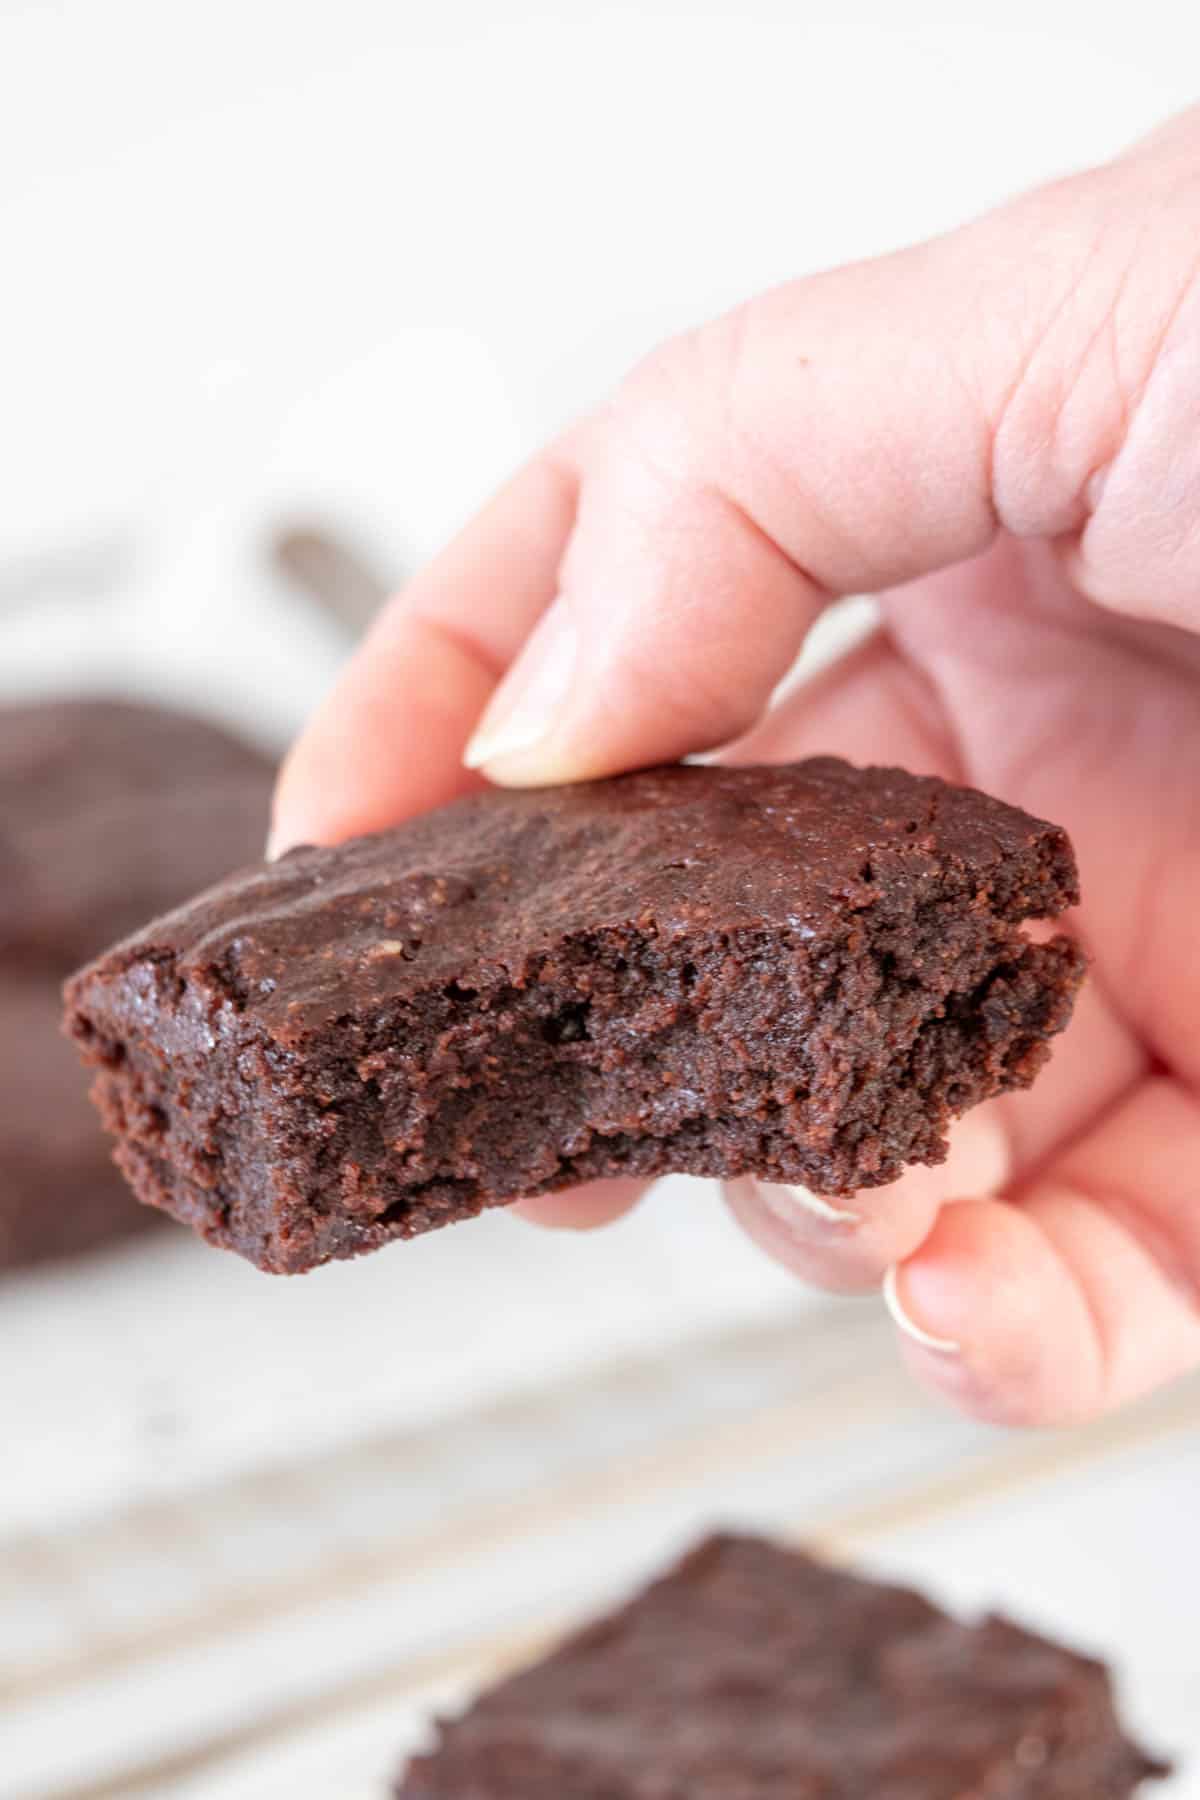 Caucasian hand holding a fudgy brownie with a bite taken.